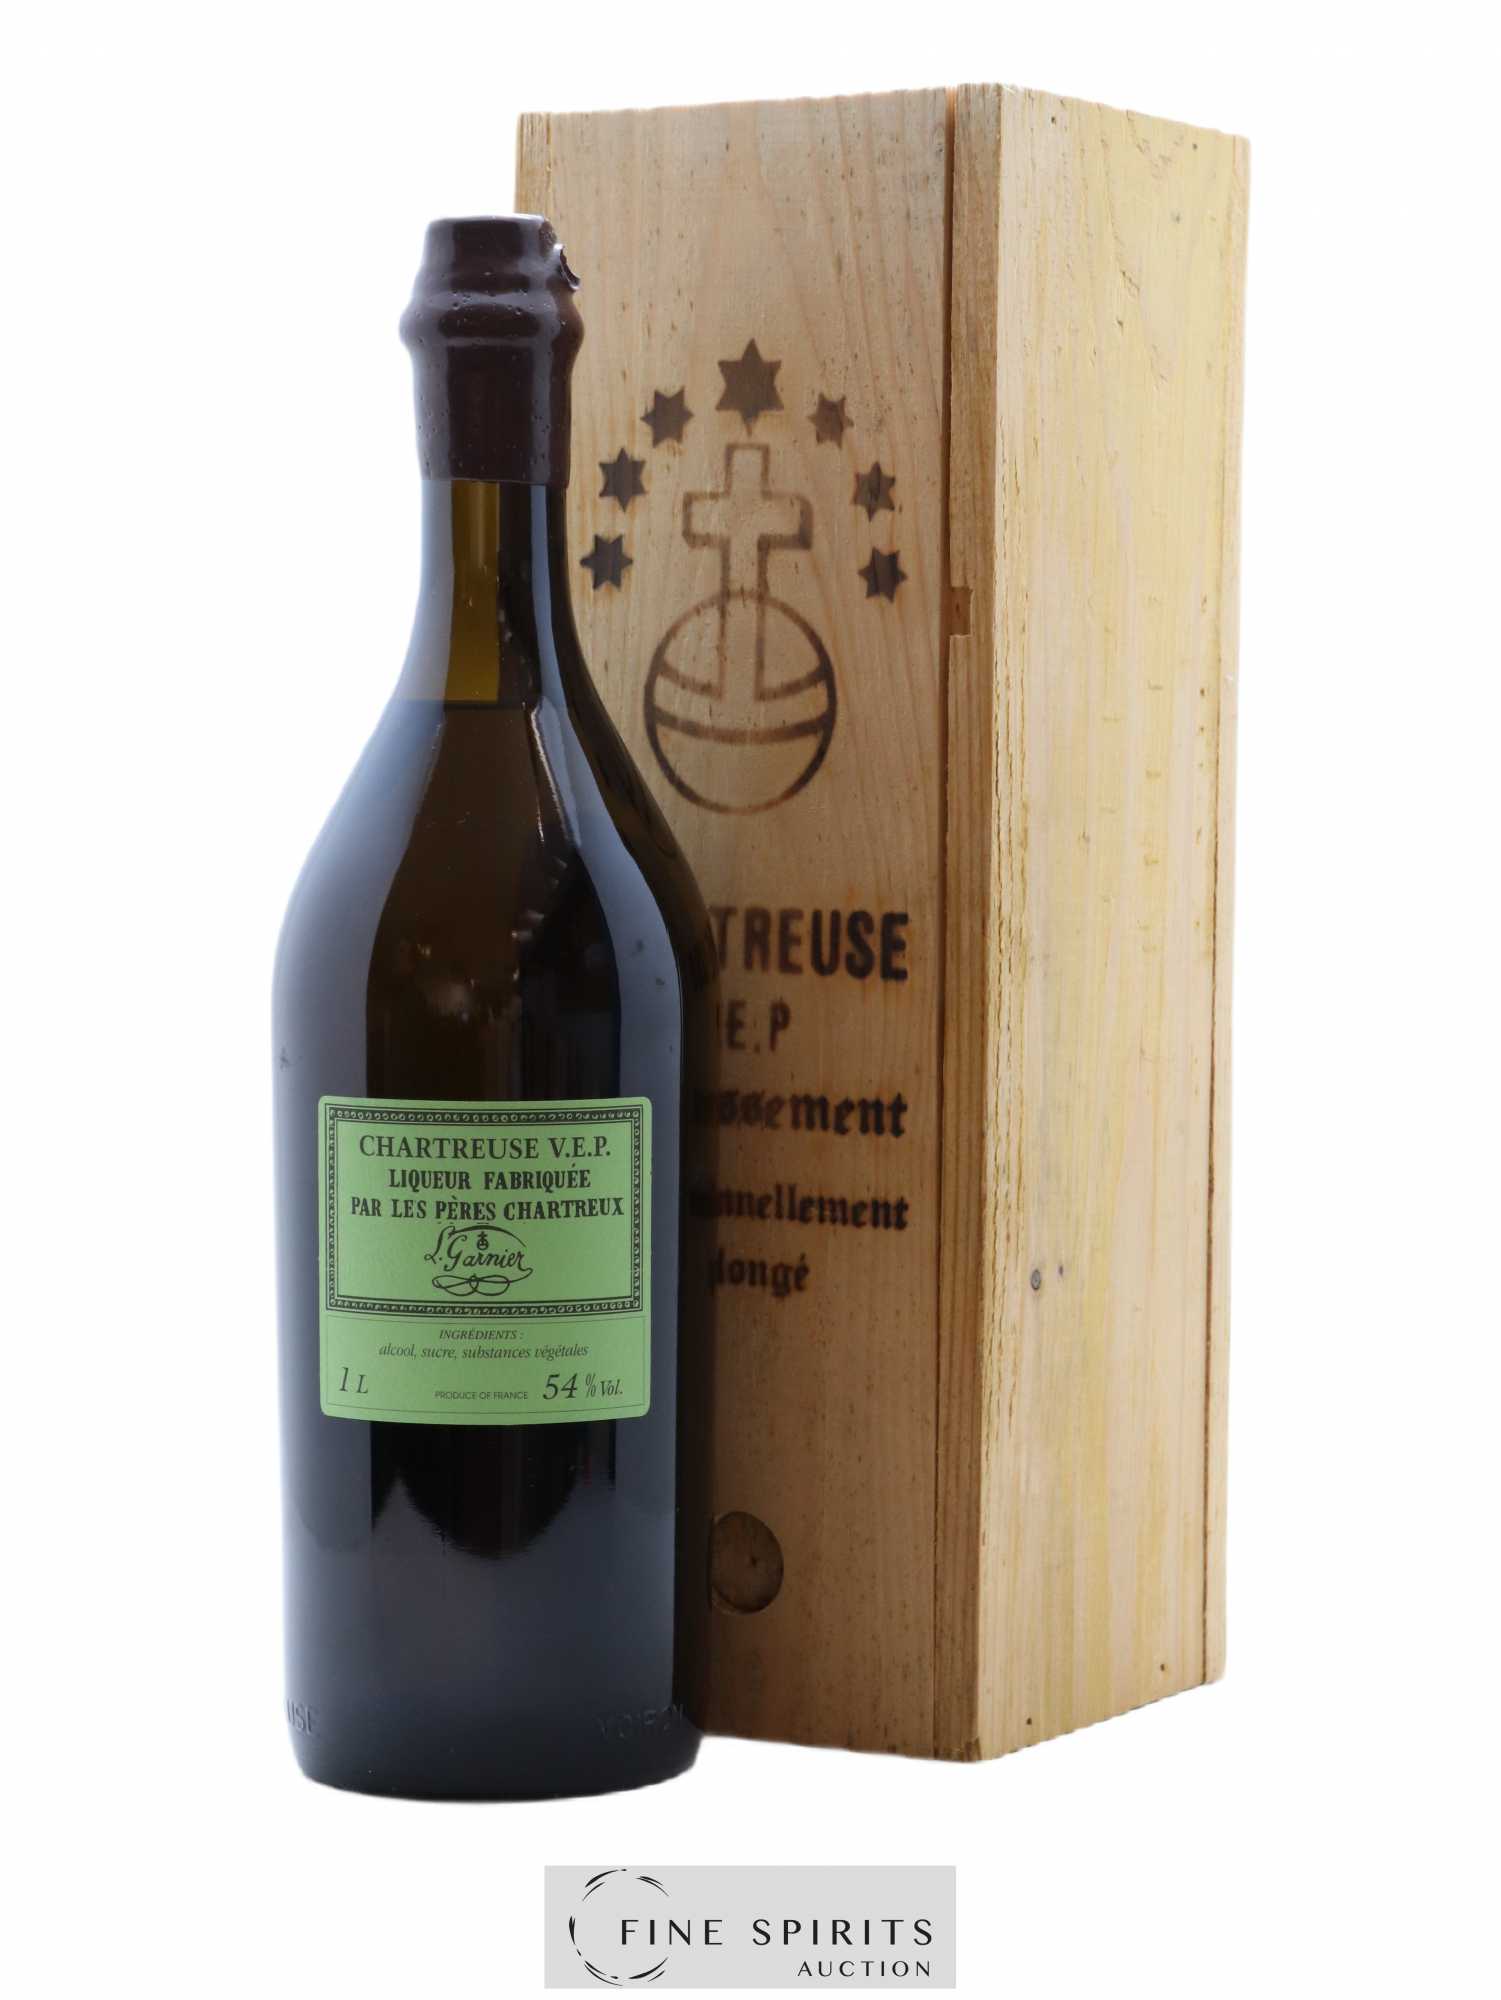 Chartreuse Of. Verte V.E.P. Mise 2000 Bouteille N°000321